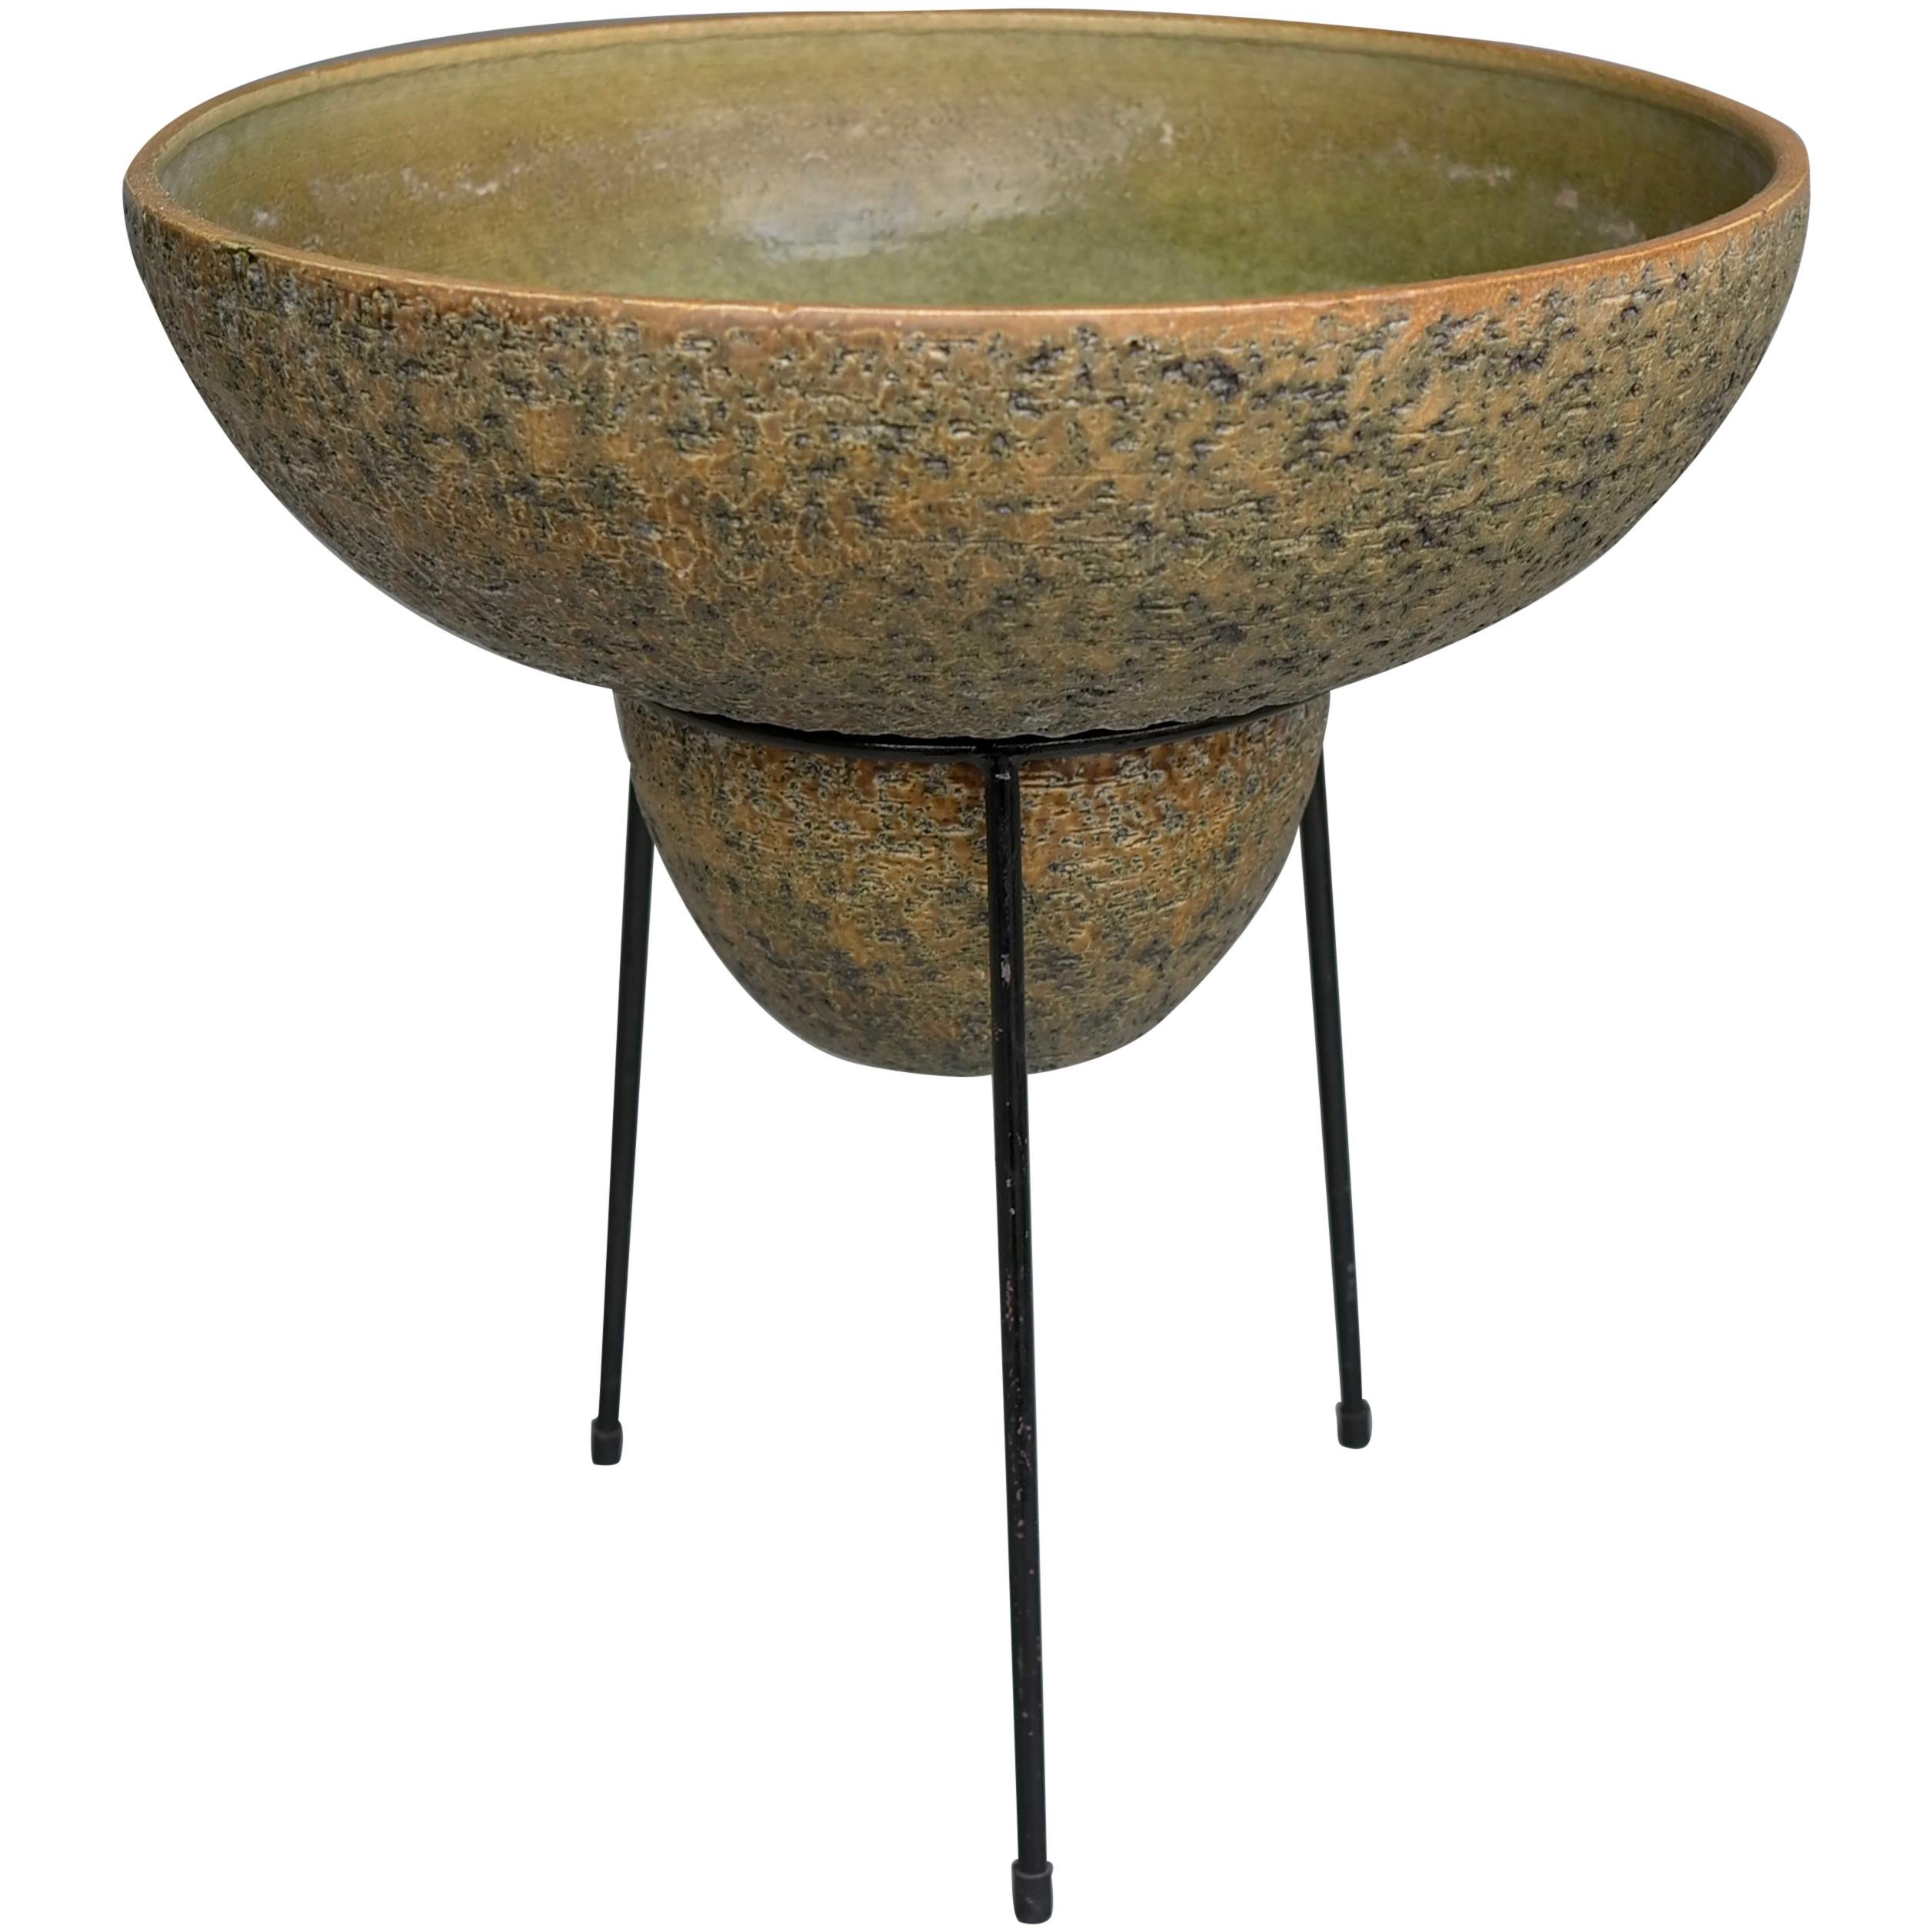 Large Green Ceramic Decorative Chasepot on a Metal Tripod Stand by Trio, 1965